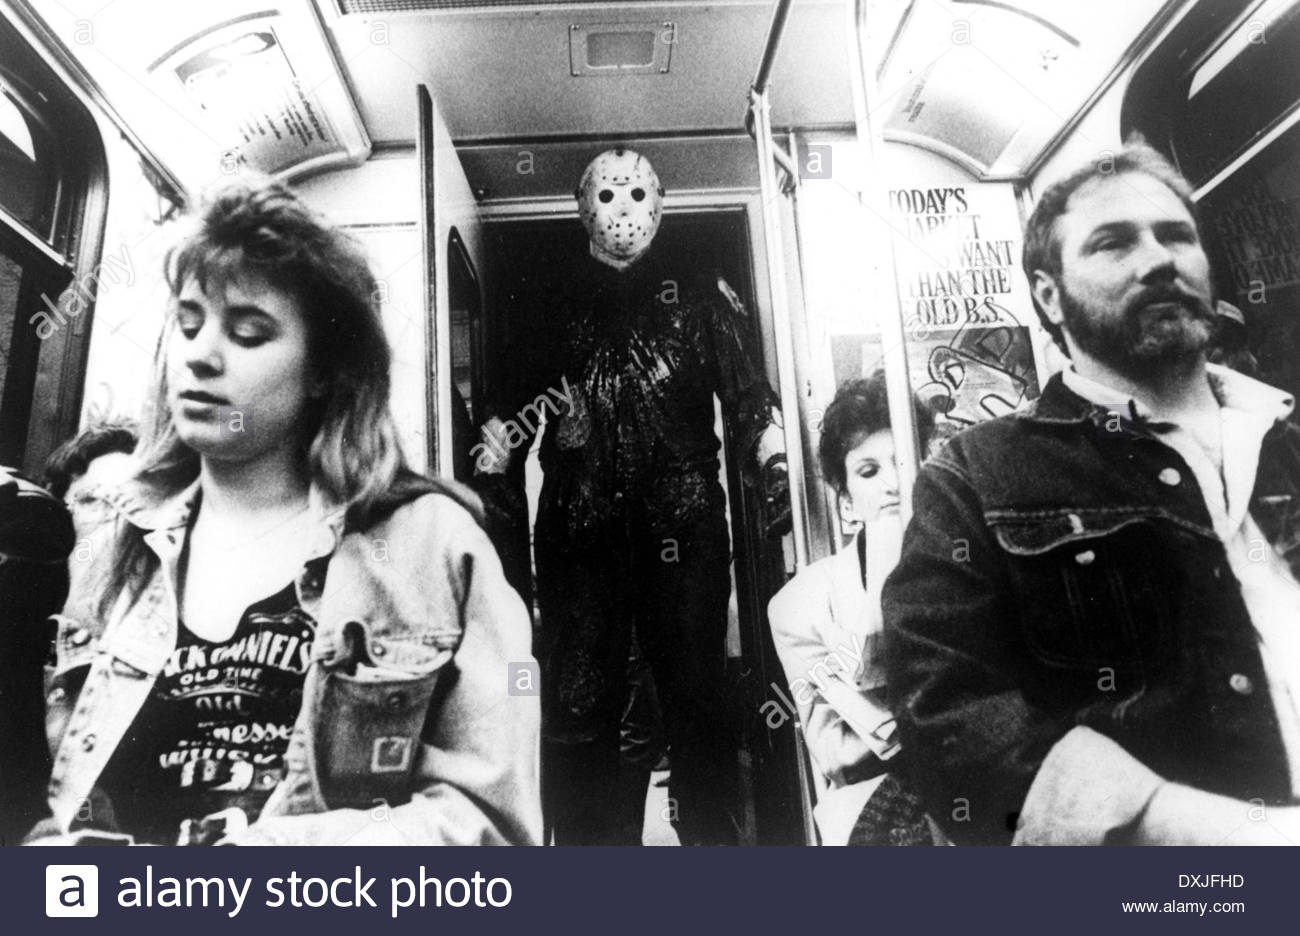 Images of Friday The 13th Part VIII: Jason Takes Manhattan | 1300x936